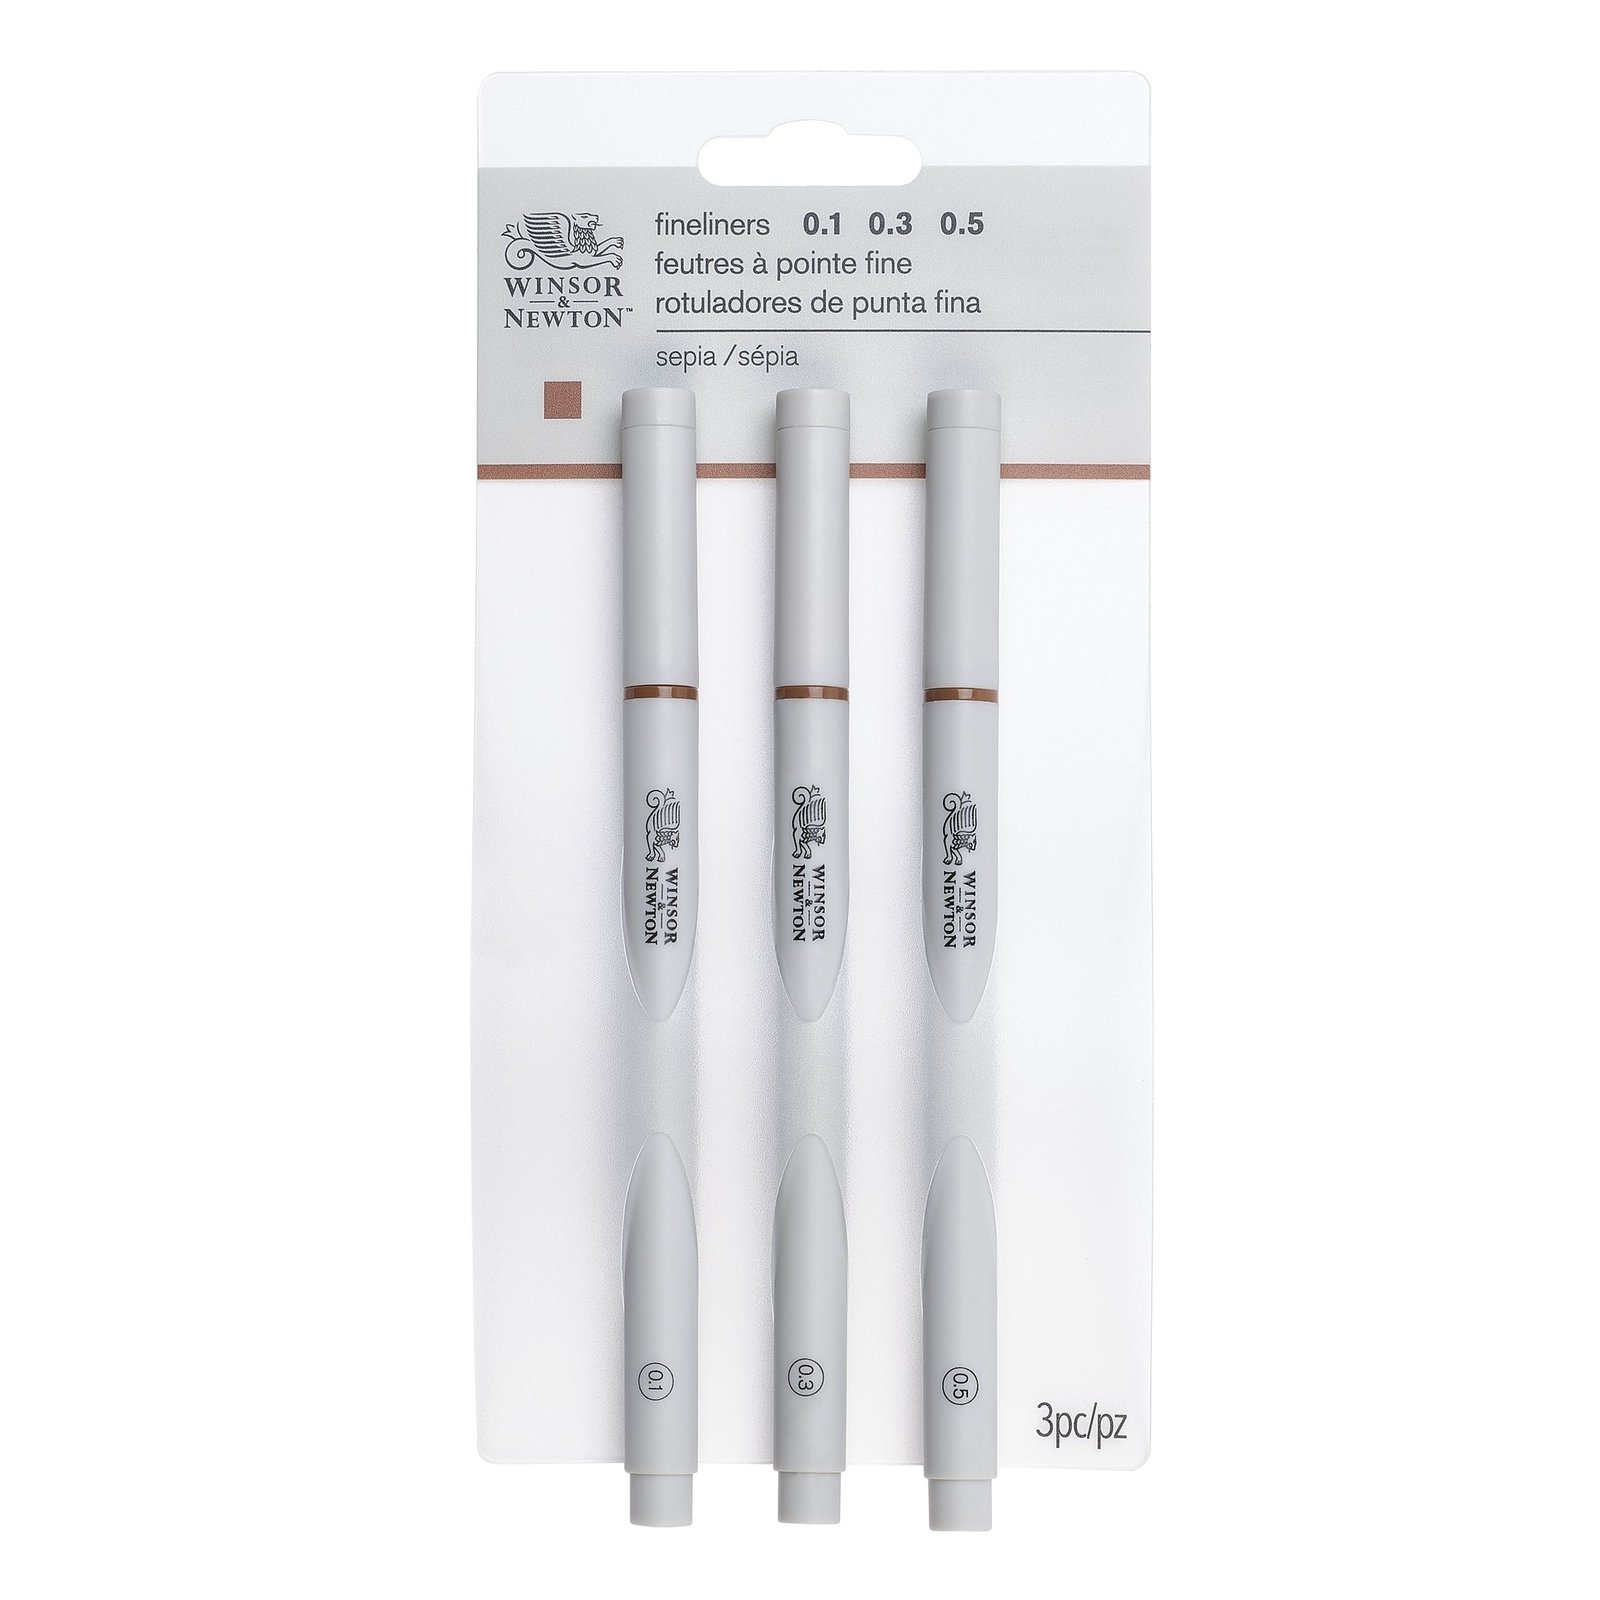 Winsor & Newton Sepia Fineliners 0.1mm,0.3mm,,0.5mm Pack of 3